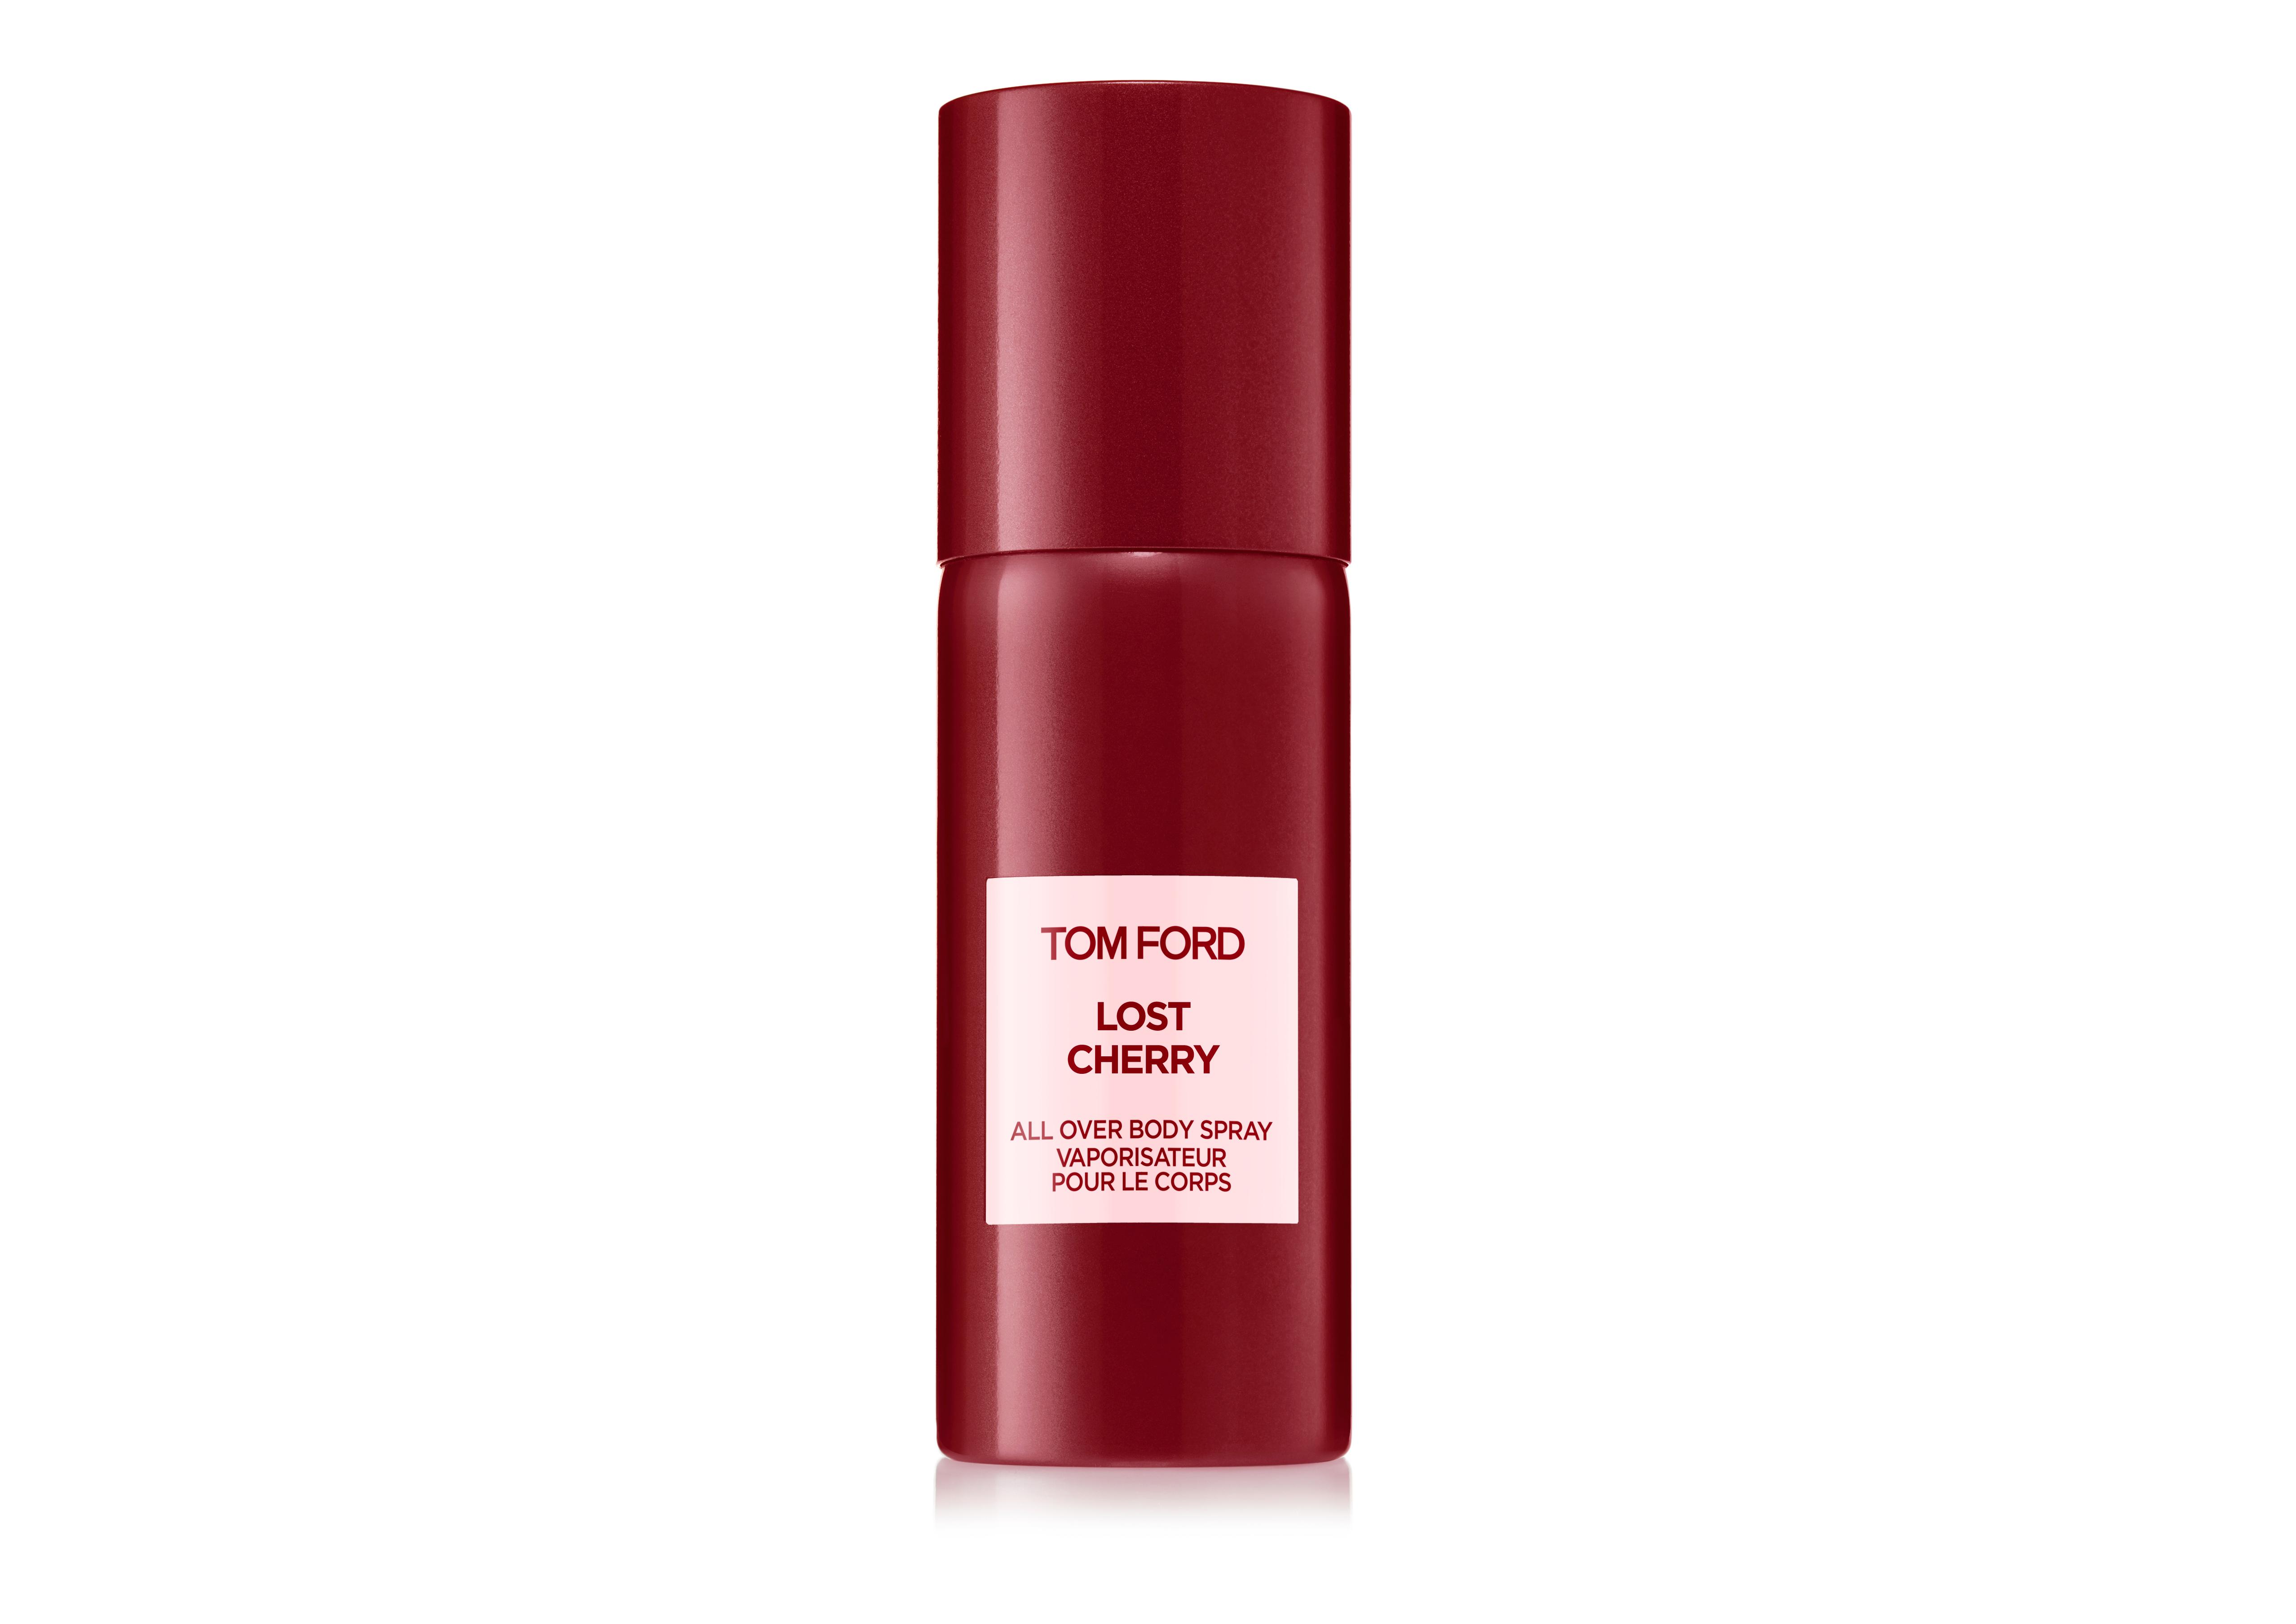 Tom Ford LOST CHERRY ALL OVER BODY SPRAY - Beauty | TomFord.co.uk